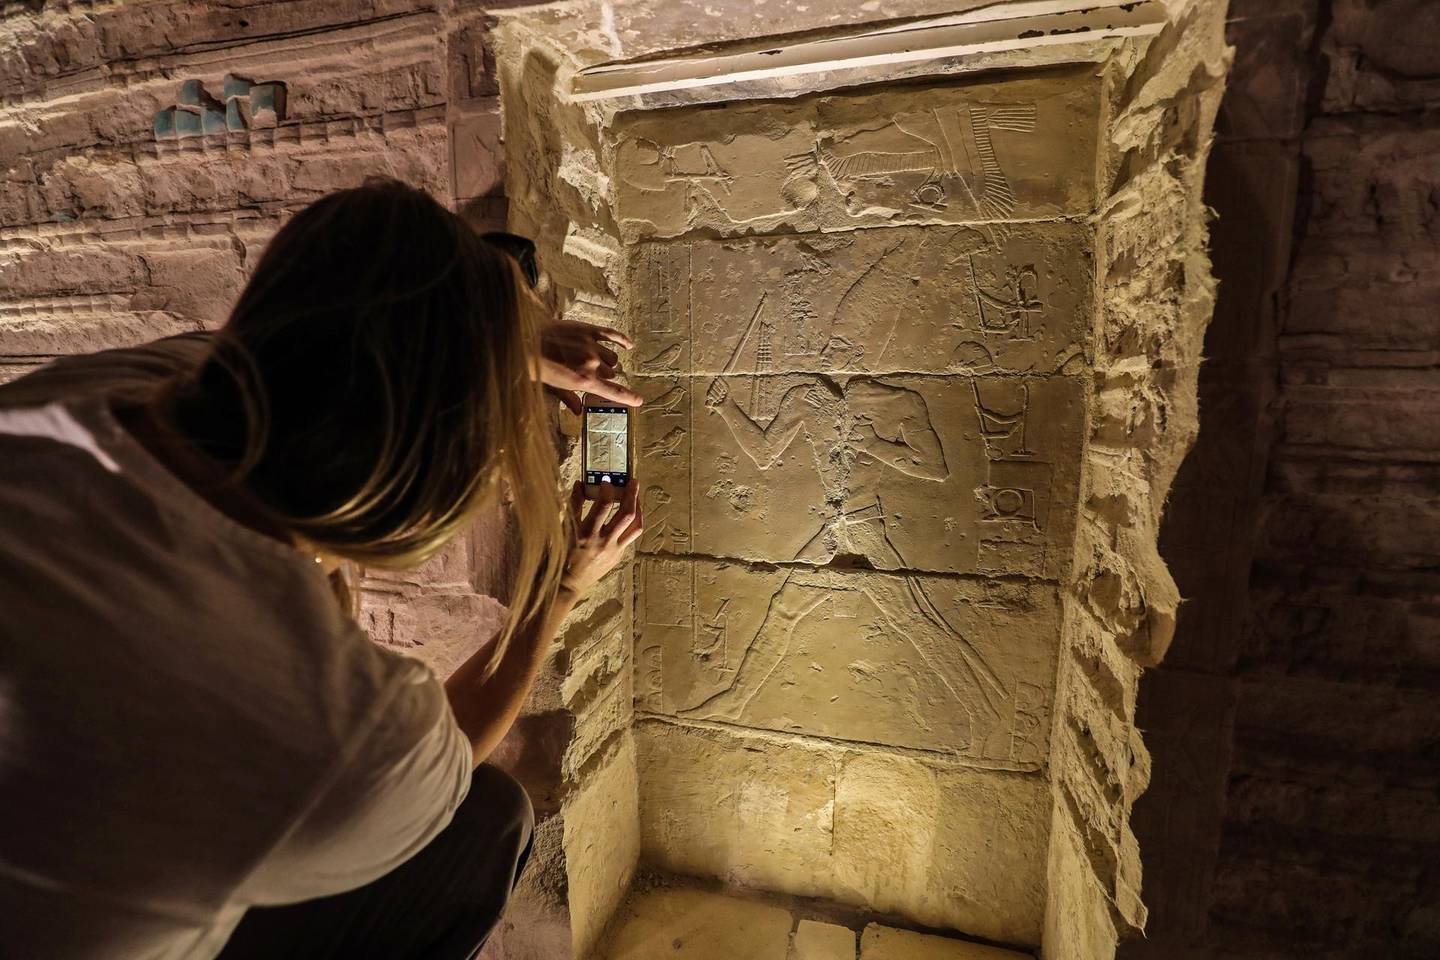 A tourist takes a picture of a relief depicting a pharaoh inside the step pyramid of Djoser in Egypt's Saqqara necropolis, south of the capital Cairo, on March 5, 2020. - Egyptian authorities inaugurated the famed step pyramid of Djoser,one of the earliest built in the country's ancient history, after years of renovation. The 4,700-year-old structure is nestled south of Cairo in the ancient capital of Memphis, a UNESCO World Heritage site, home to some of Egypt's most fascinating monuments. Renovation works started in 2006 but was interrupted in 2011 and 2012 for "security reasons" due to turmoil caused by a popular uprising that toppled late president Hosni Mubarak. (Photo by Mohamed el-Shahed / AFP)